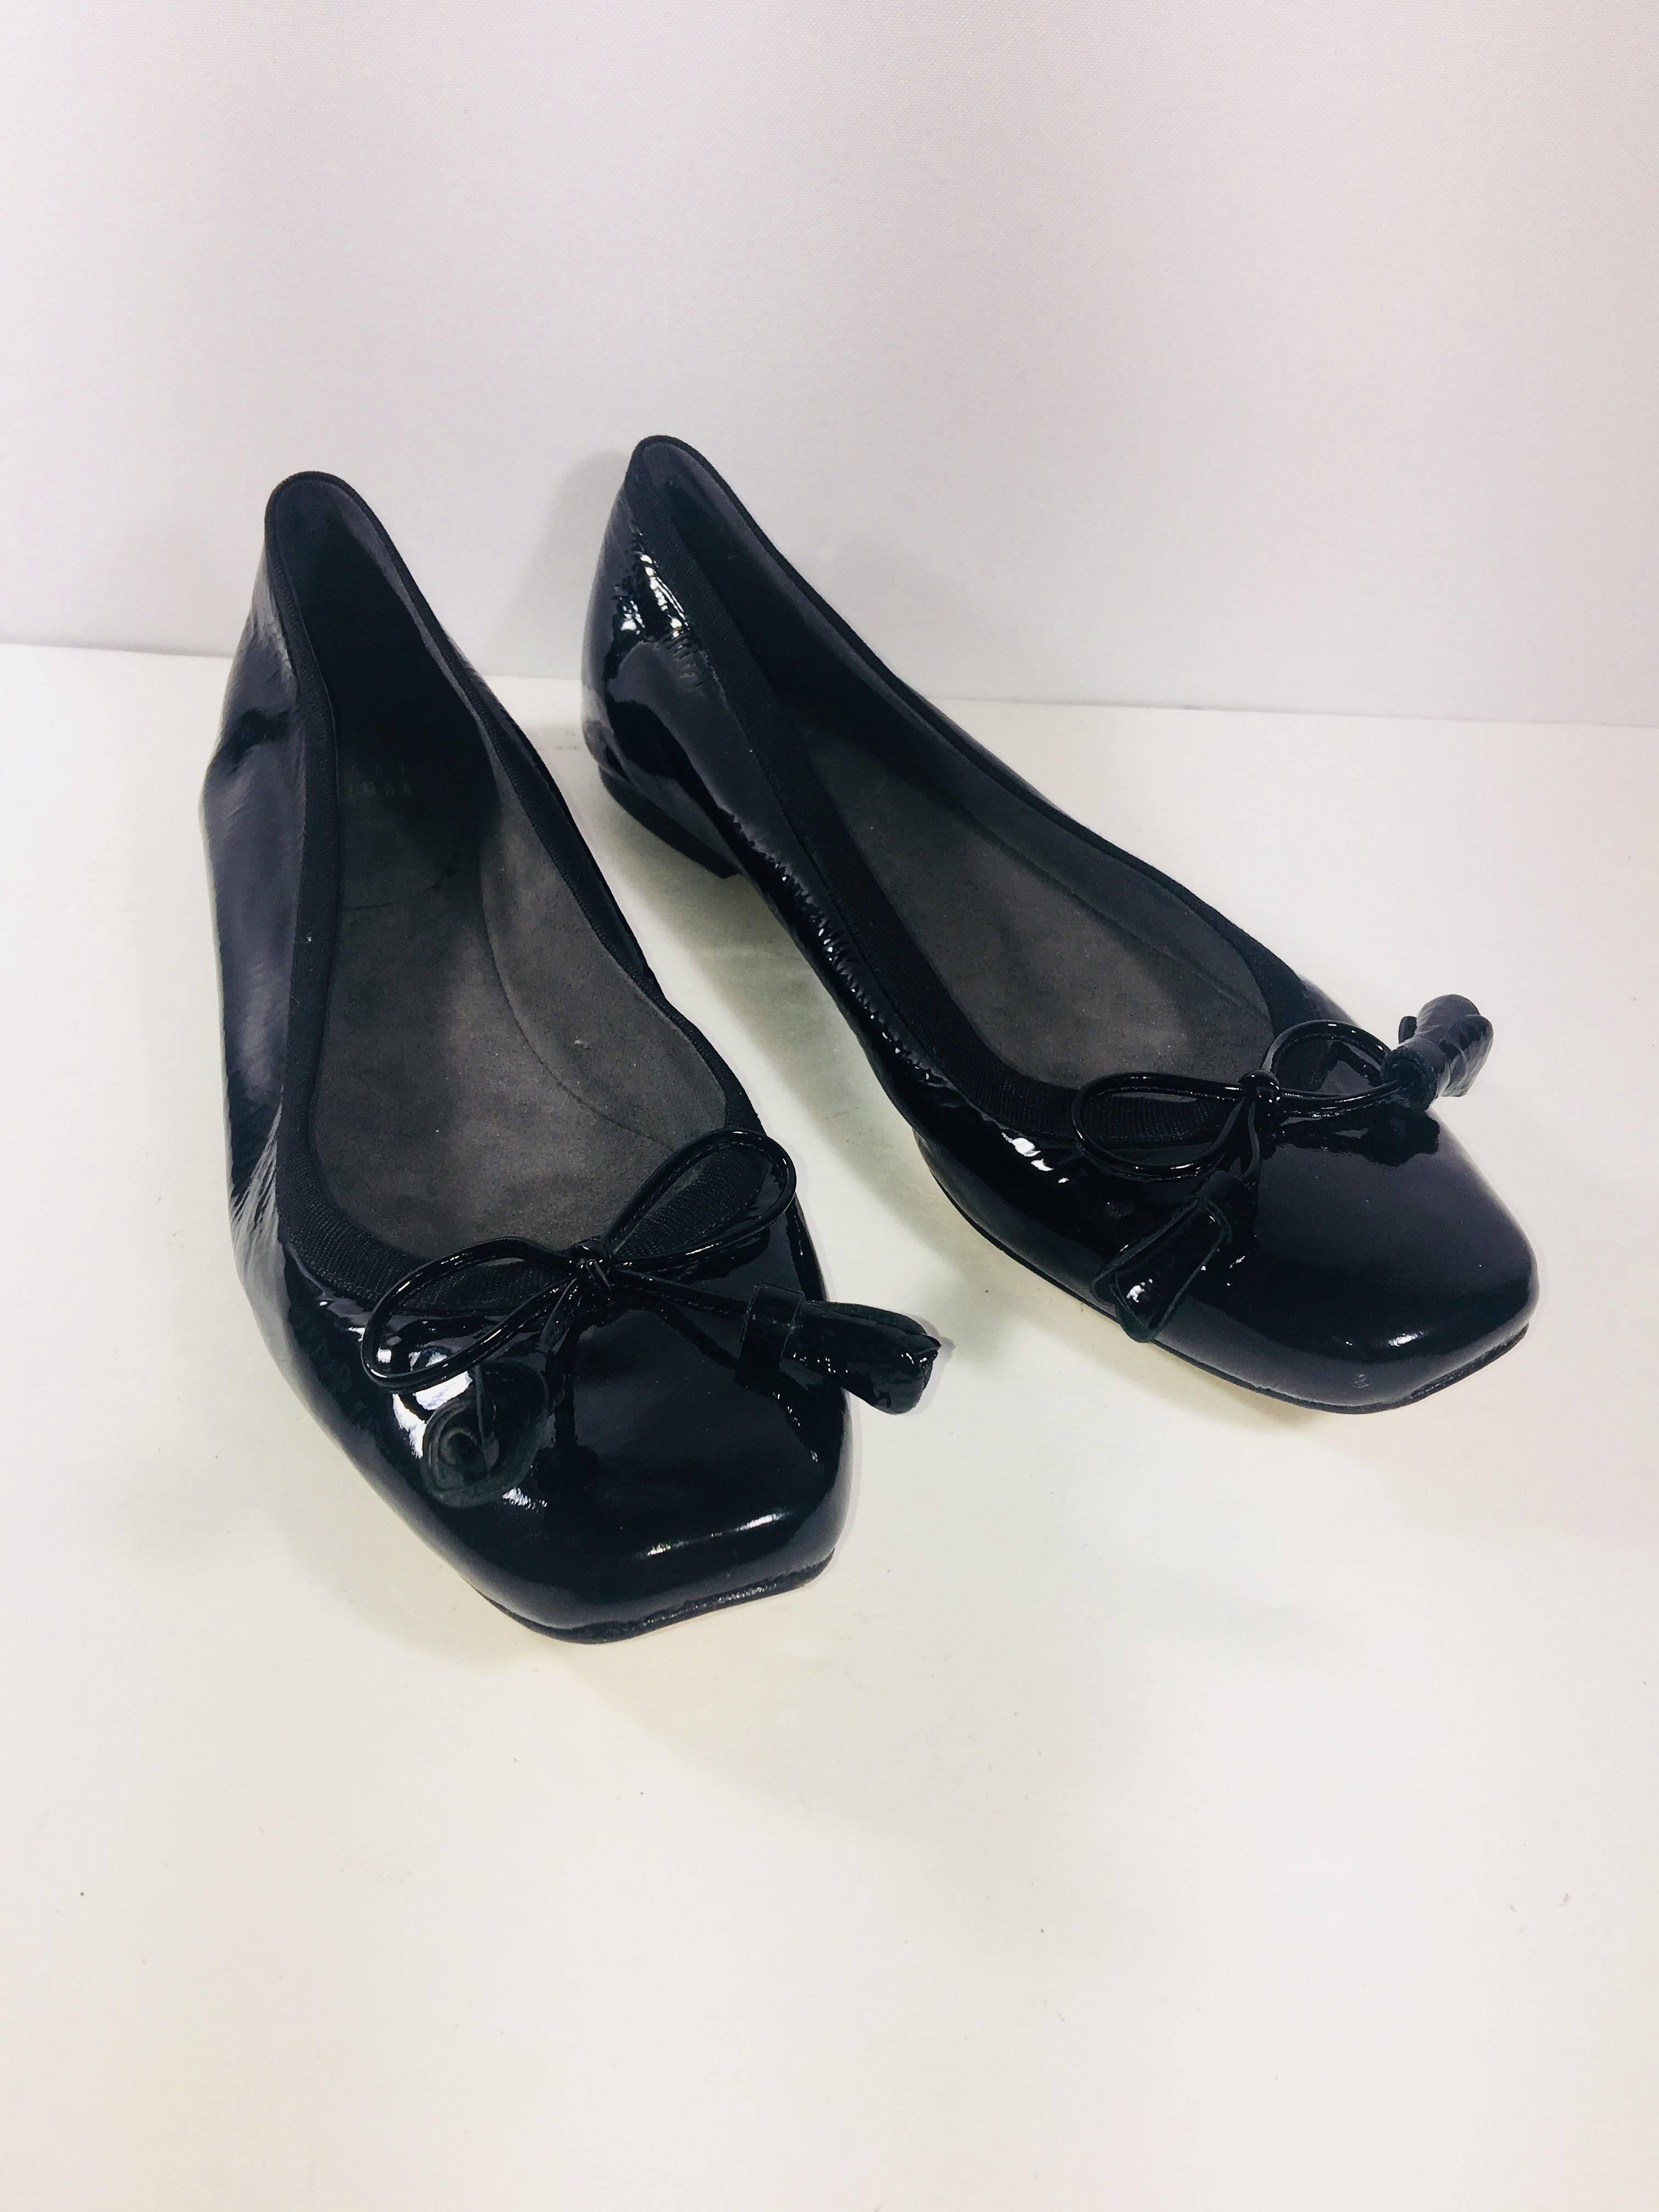 Stuart Weitzman Ballet Flat in Black Patent Leather with Bow Accent in US 9.5